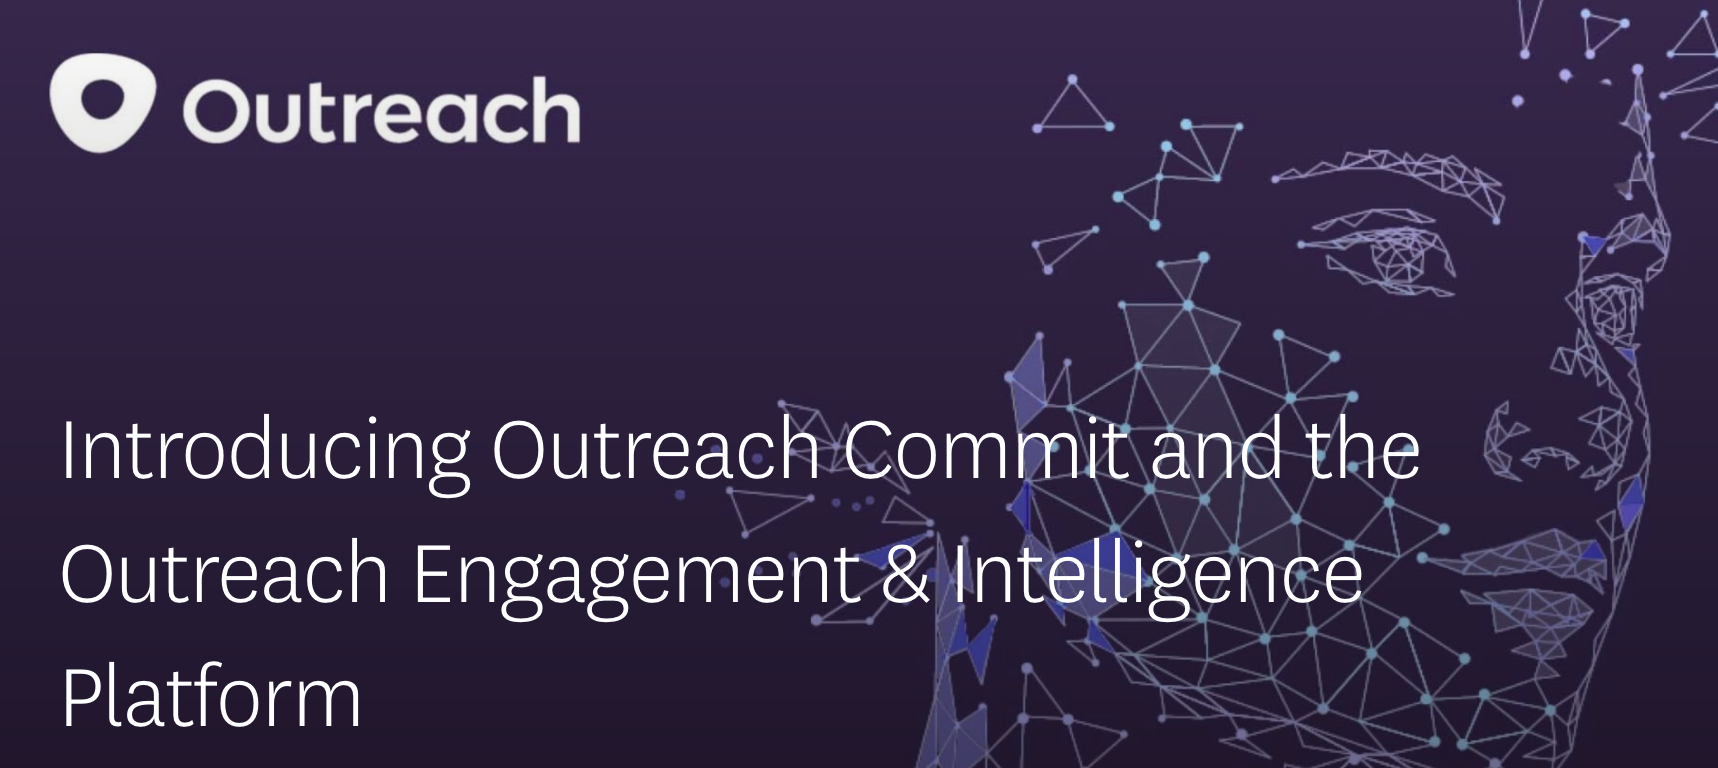 Outreach Expands Platform to Include Revenue Intelligence Capabilities with Latest Acquisition